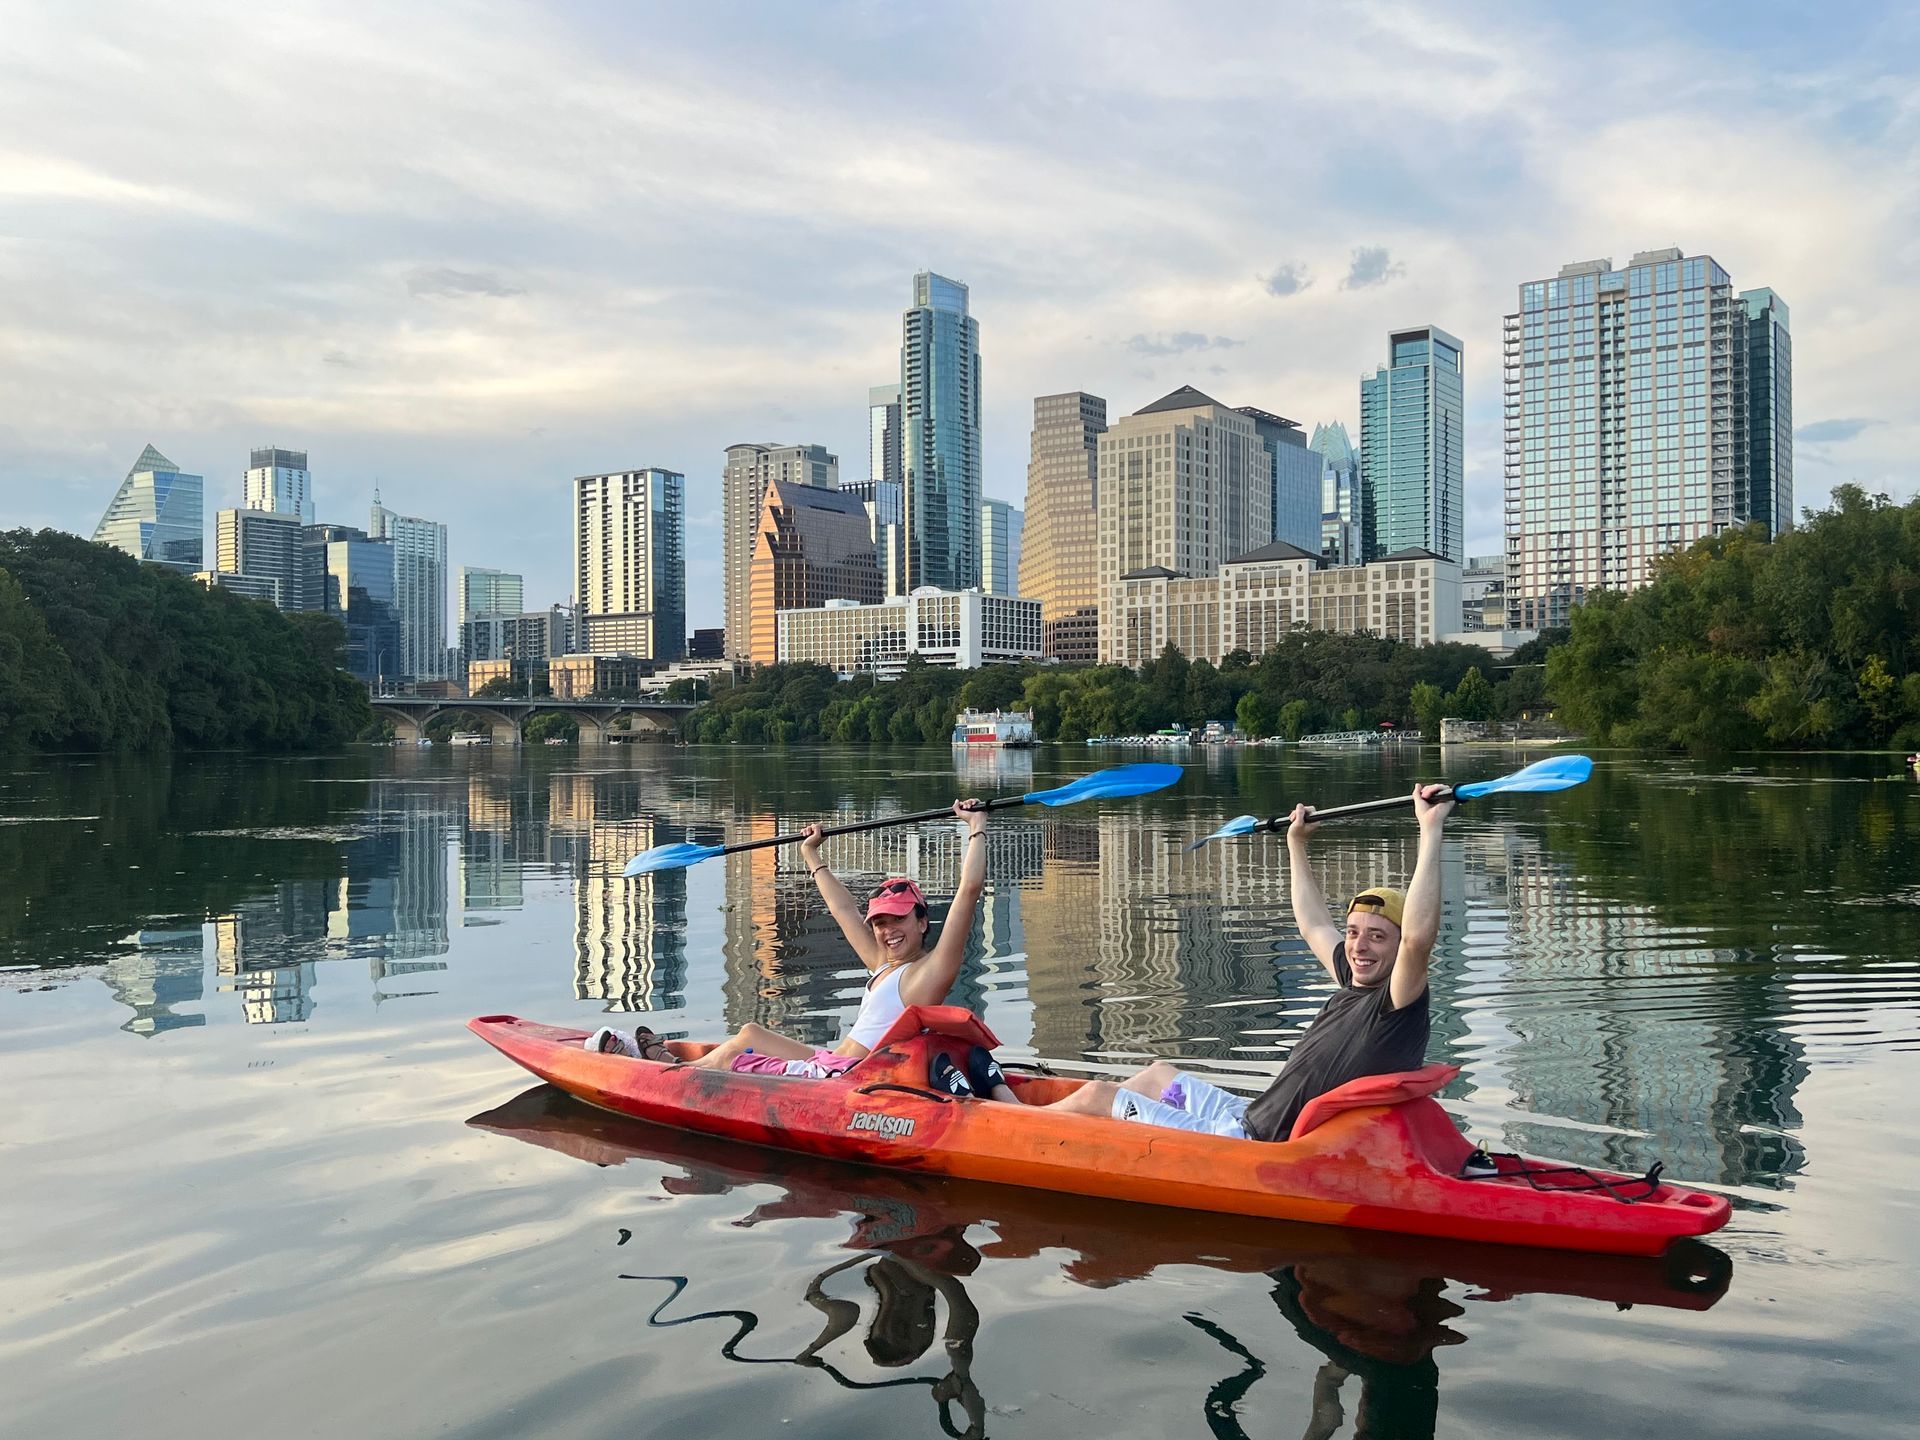 A man is paddling a kayak on a river in front of tall buildings.